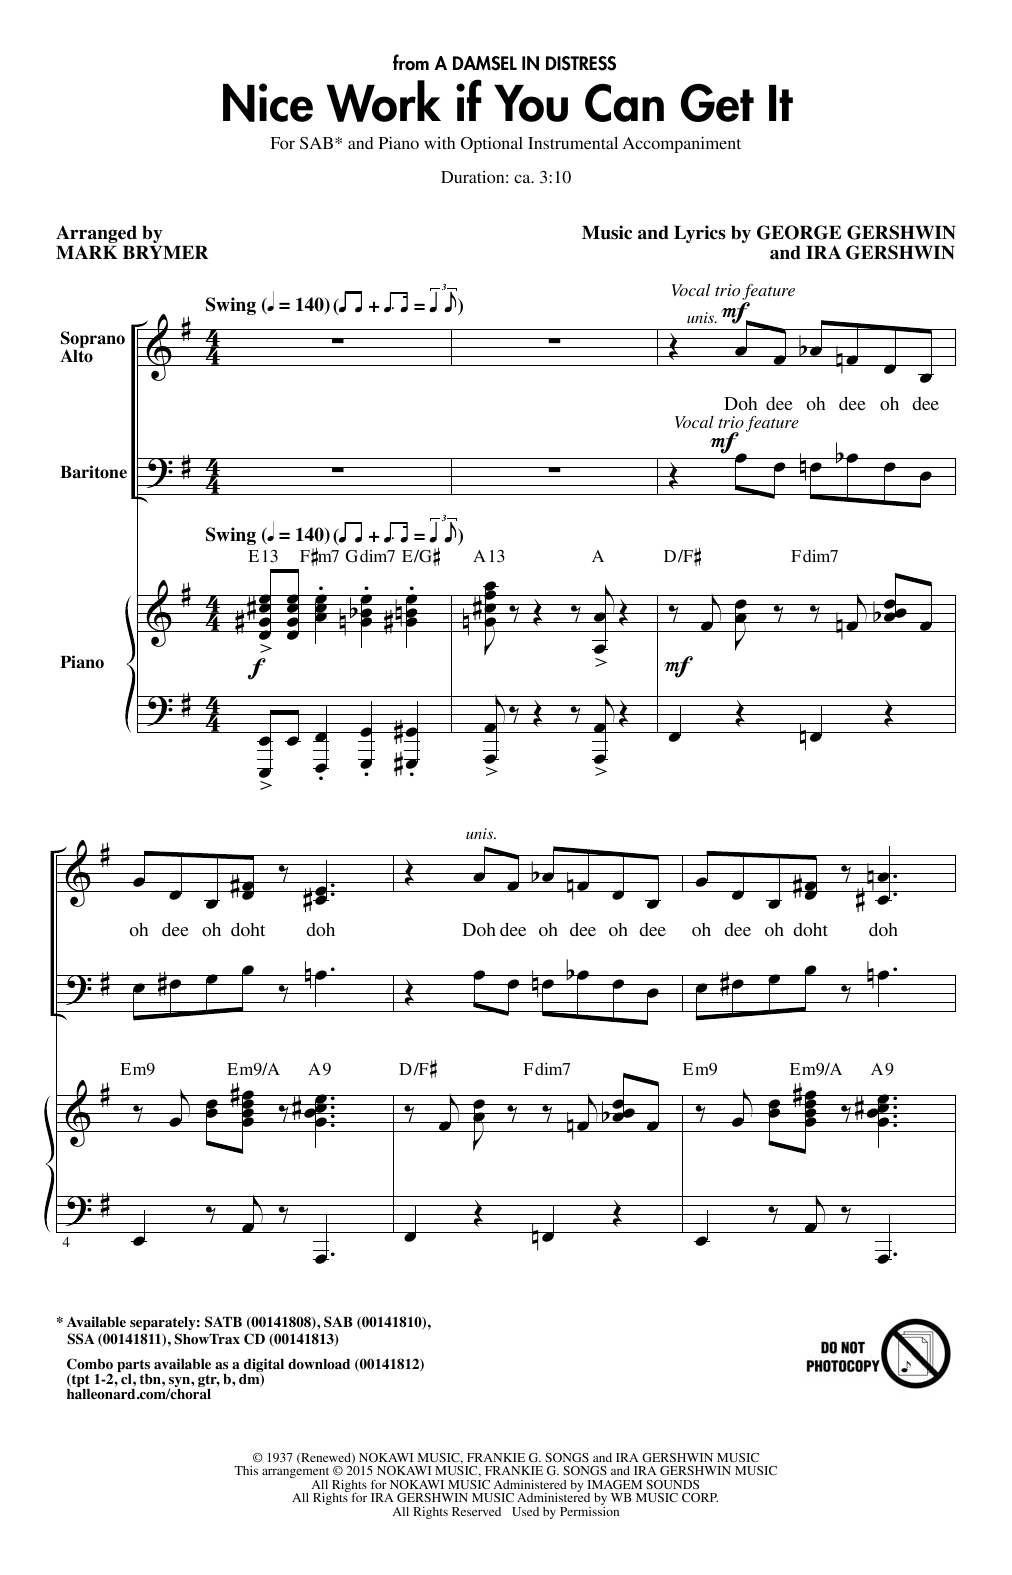 Download Mark Brymer Nice Work If You Can Get It Sheet Music